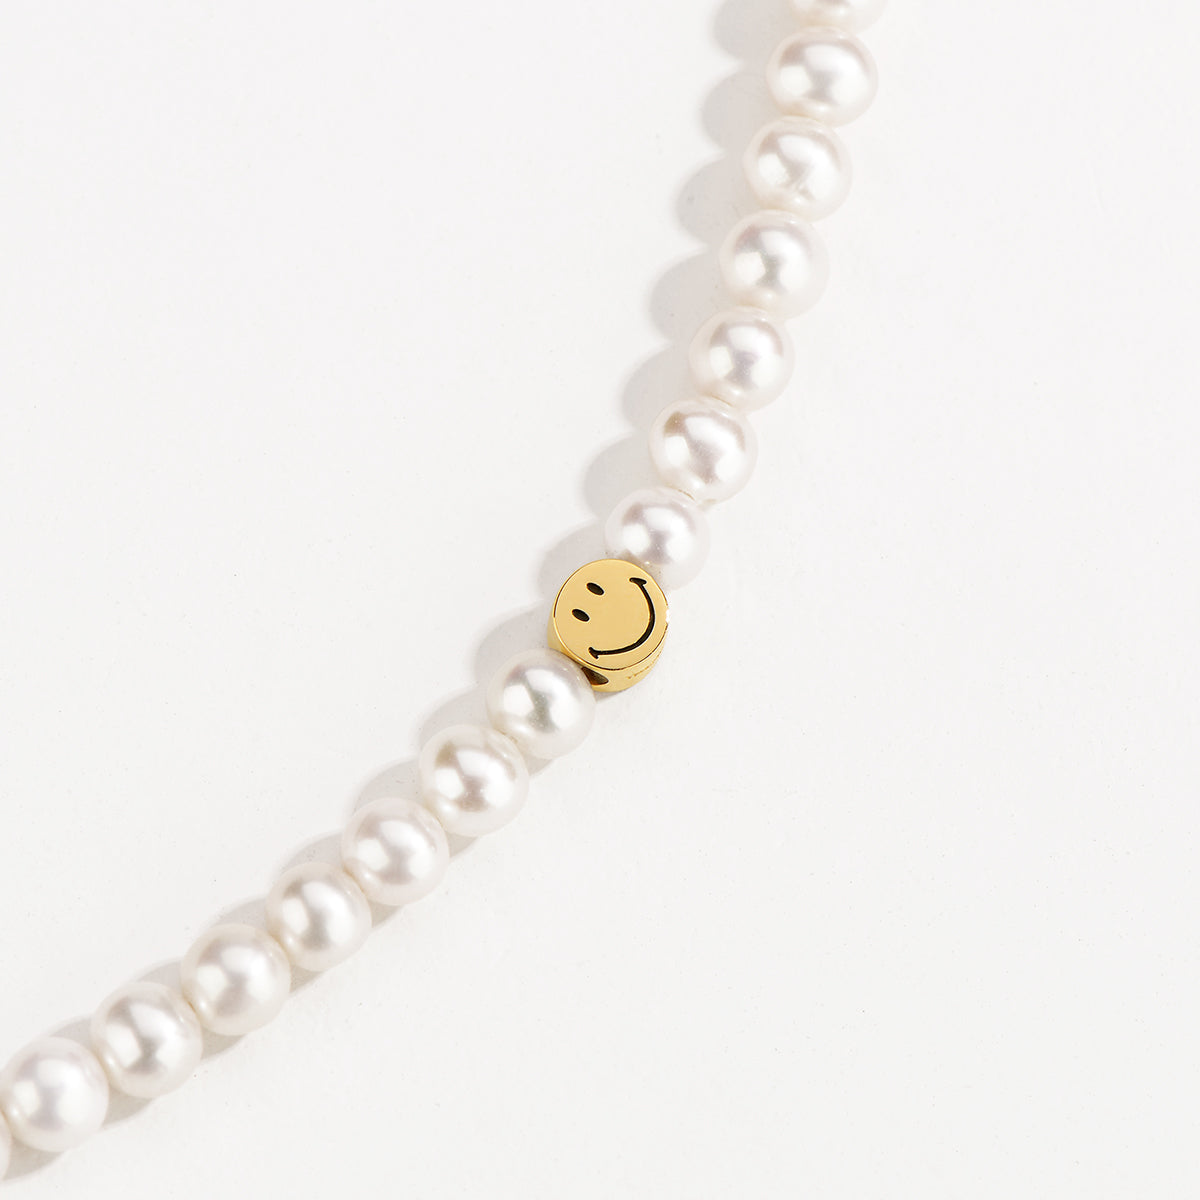 Smiley pearl necklace (smile pearl necklace) Yk necklace assure quality